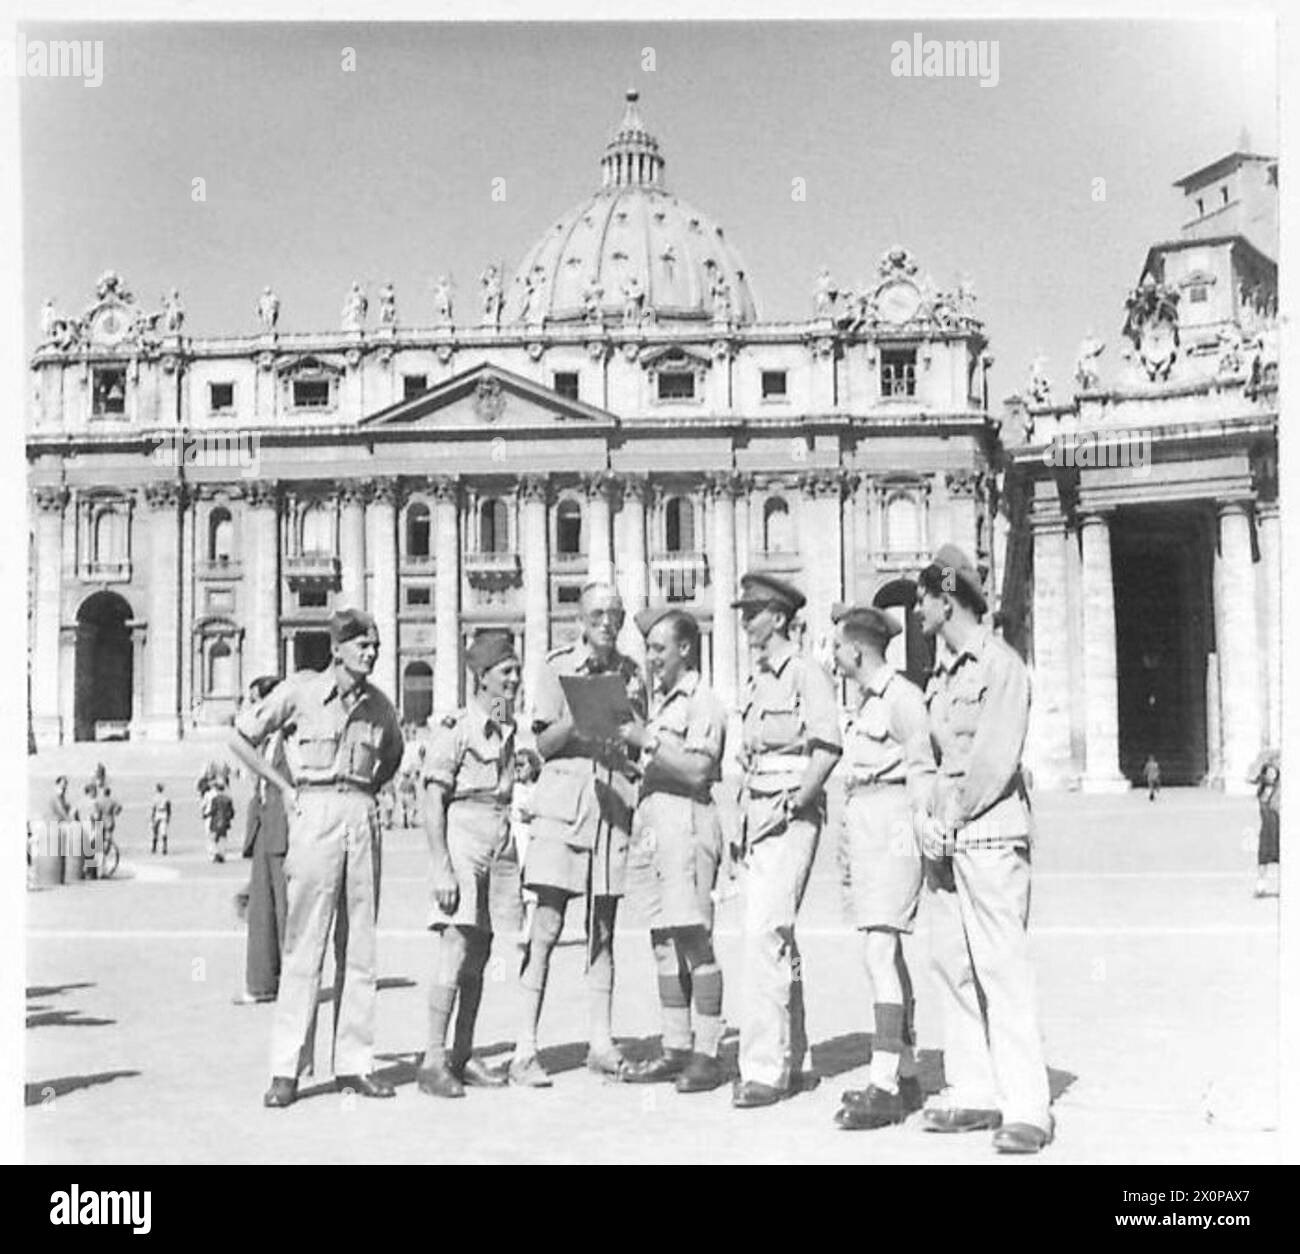 ITALY : B.B.C. RECORDING VAN - A group of 6 NCOs and men, with Major Haddon of the B.B.C. in front of St. Peter's Church. They are, left to right:- L/Cpl. E. Turner of 10 Rayleigh Road, Woodford Green, E.18. S/Sgt. G. Little of 61 Kent Avenue, Leigh-on-Sea, Essex Dvr. W.A. Clark of Trinity Church, Huntingdon Dvr. J.H. Rennison of 3 Claremont Avenue, Maghull, near Liverpool L/Cpl. F.G. Manvell of 72 Camden Road, Tunbridge Wells, Kent and Pte. Nat Selby of 19 Back Street, Biggleswade, Beds. Photographic negative , British Army Stock Photo